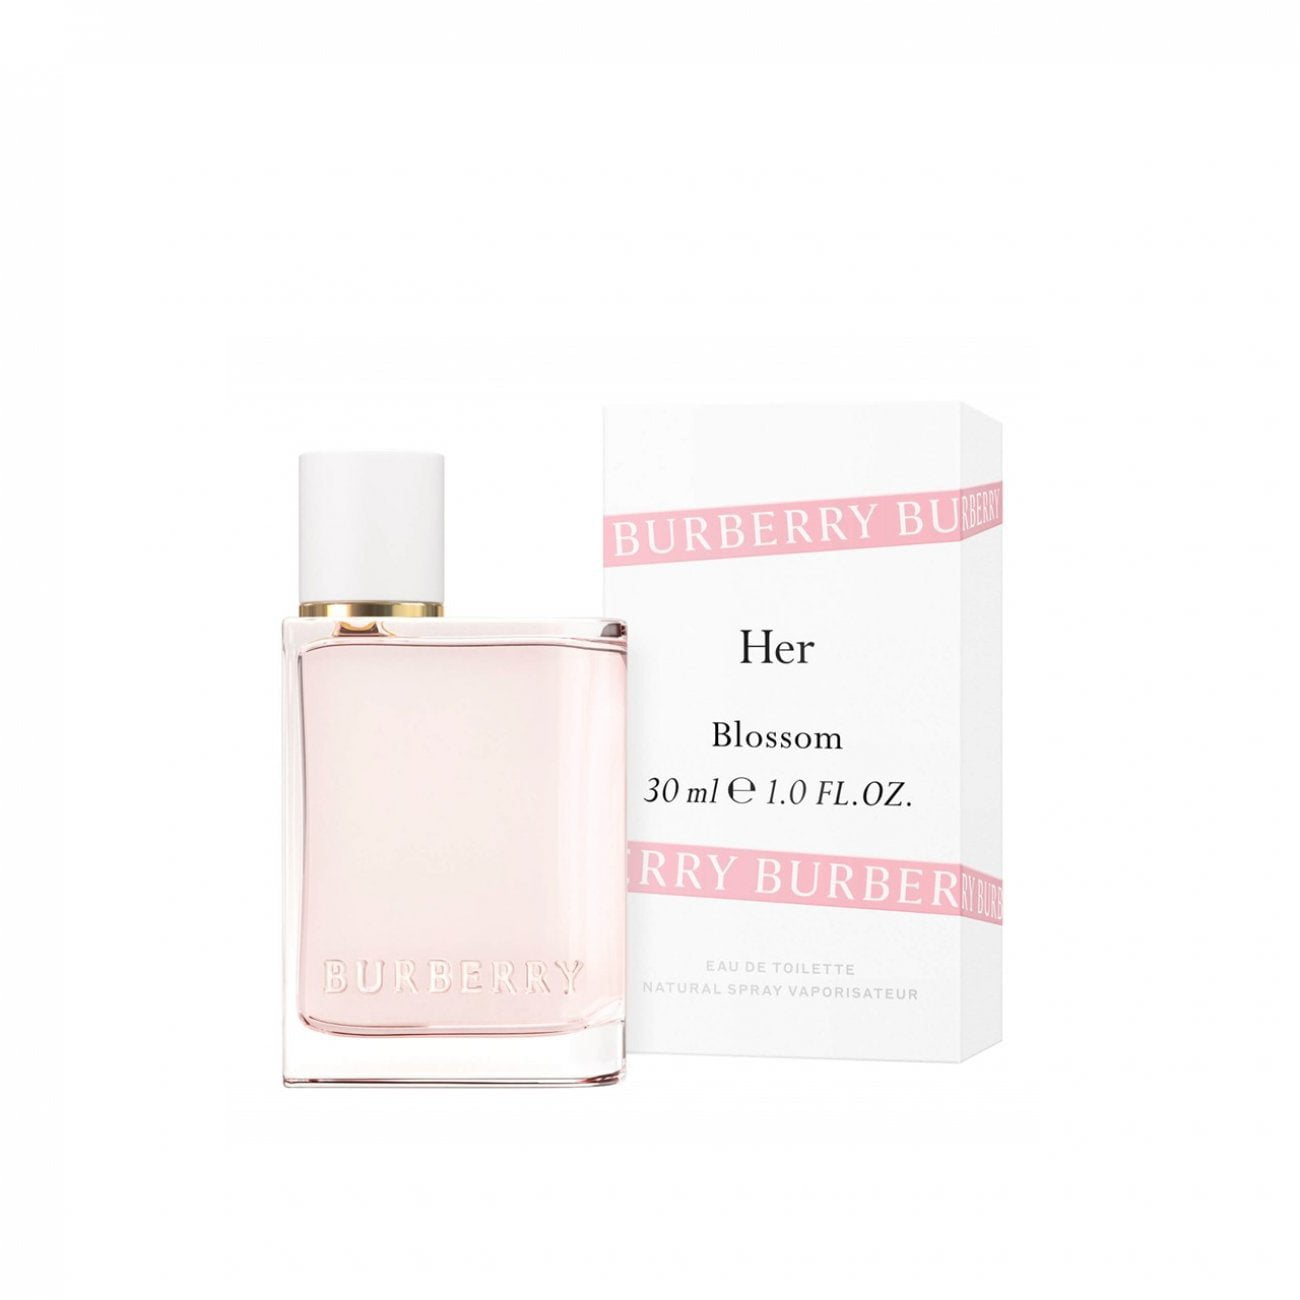 Her Blossom Eau de Toilette Spray for Women by Burberry, Product image 1